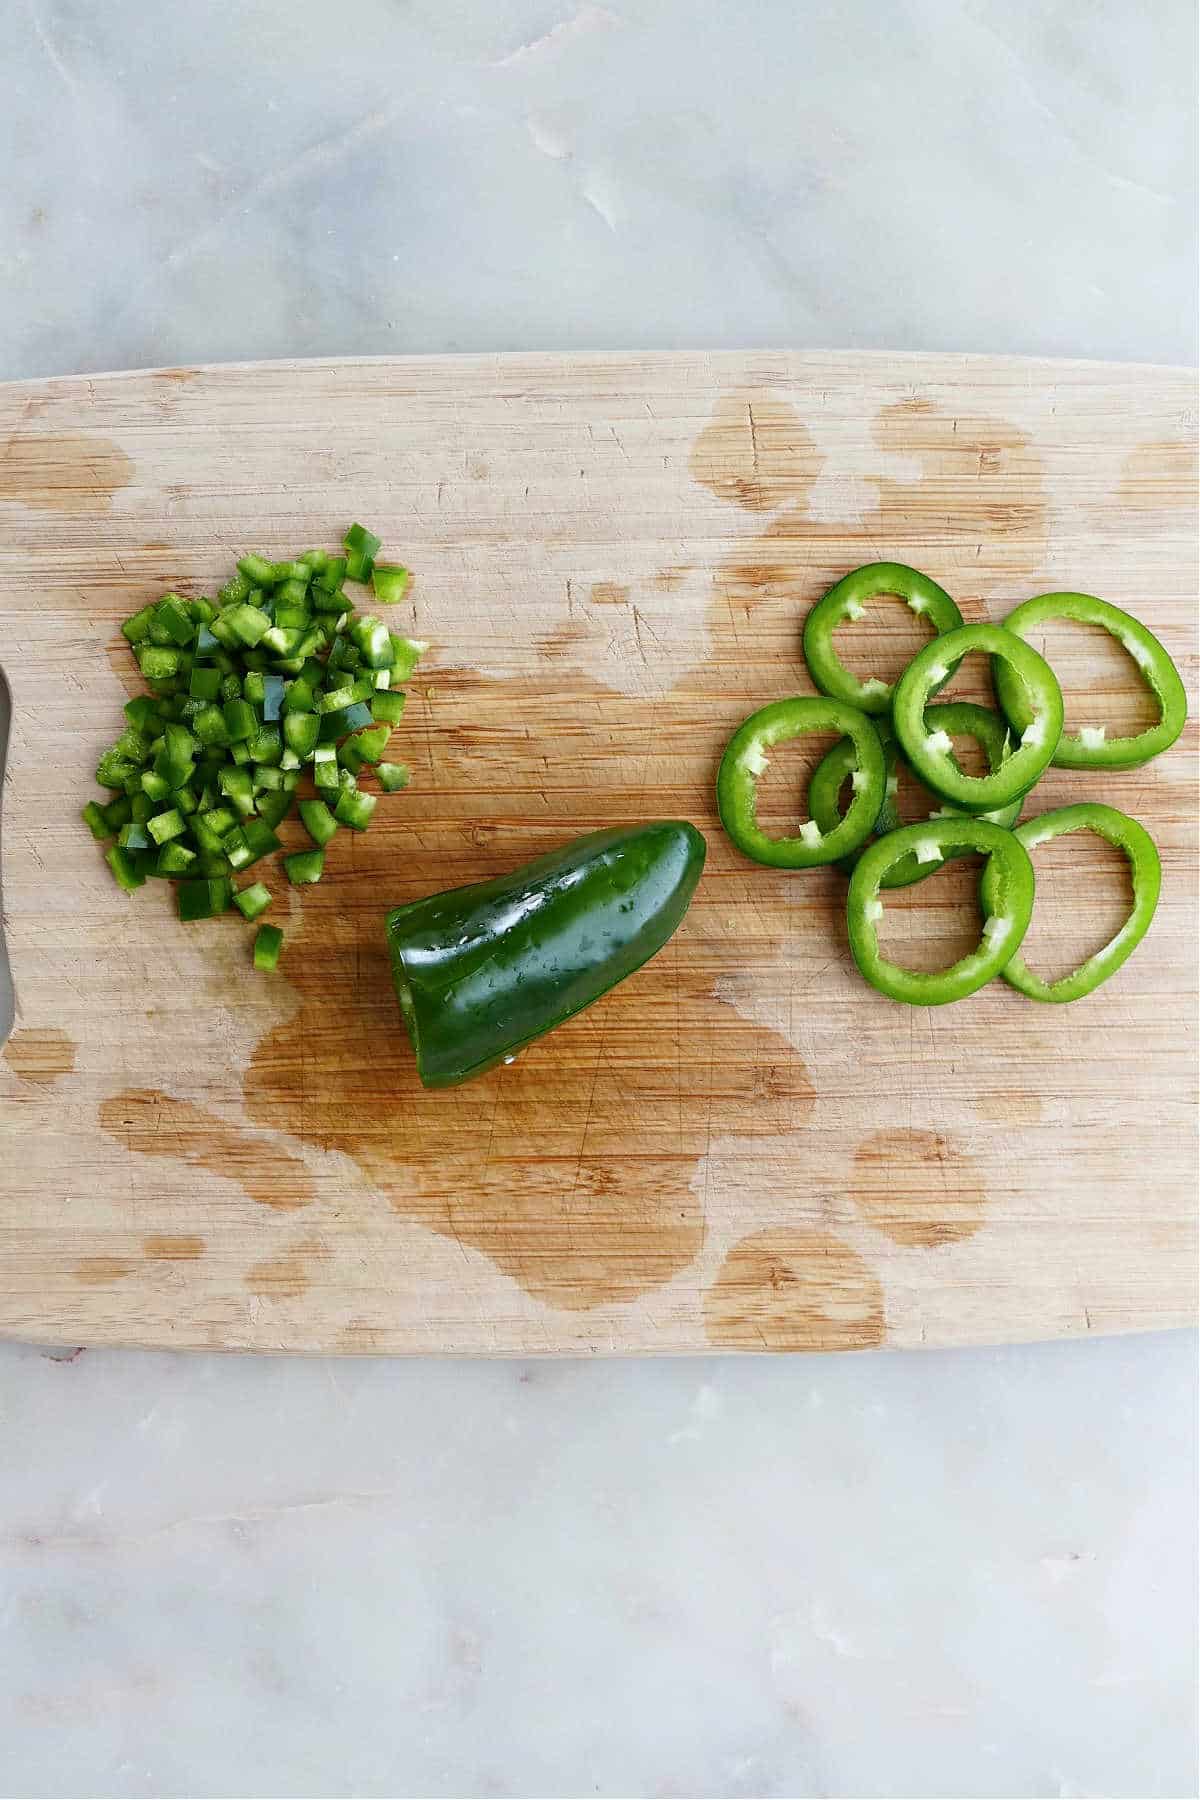 diced, whole, and sliced jalapeños next to each other on a cutting board